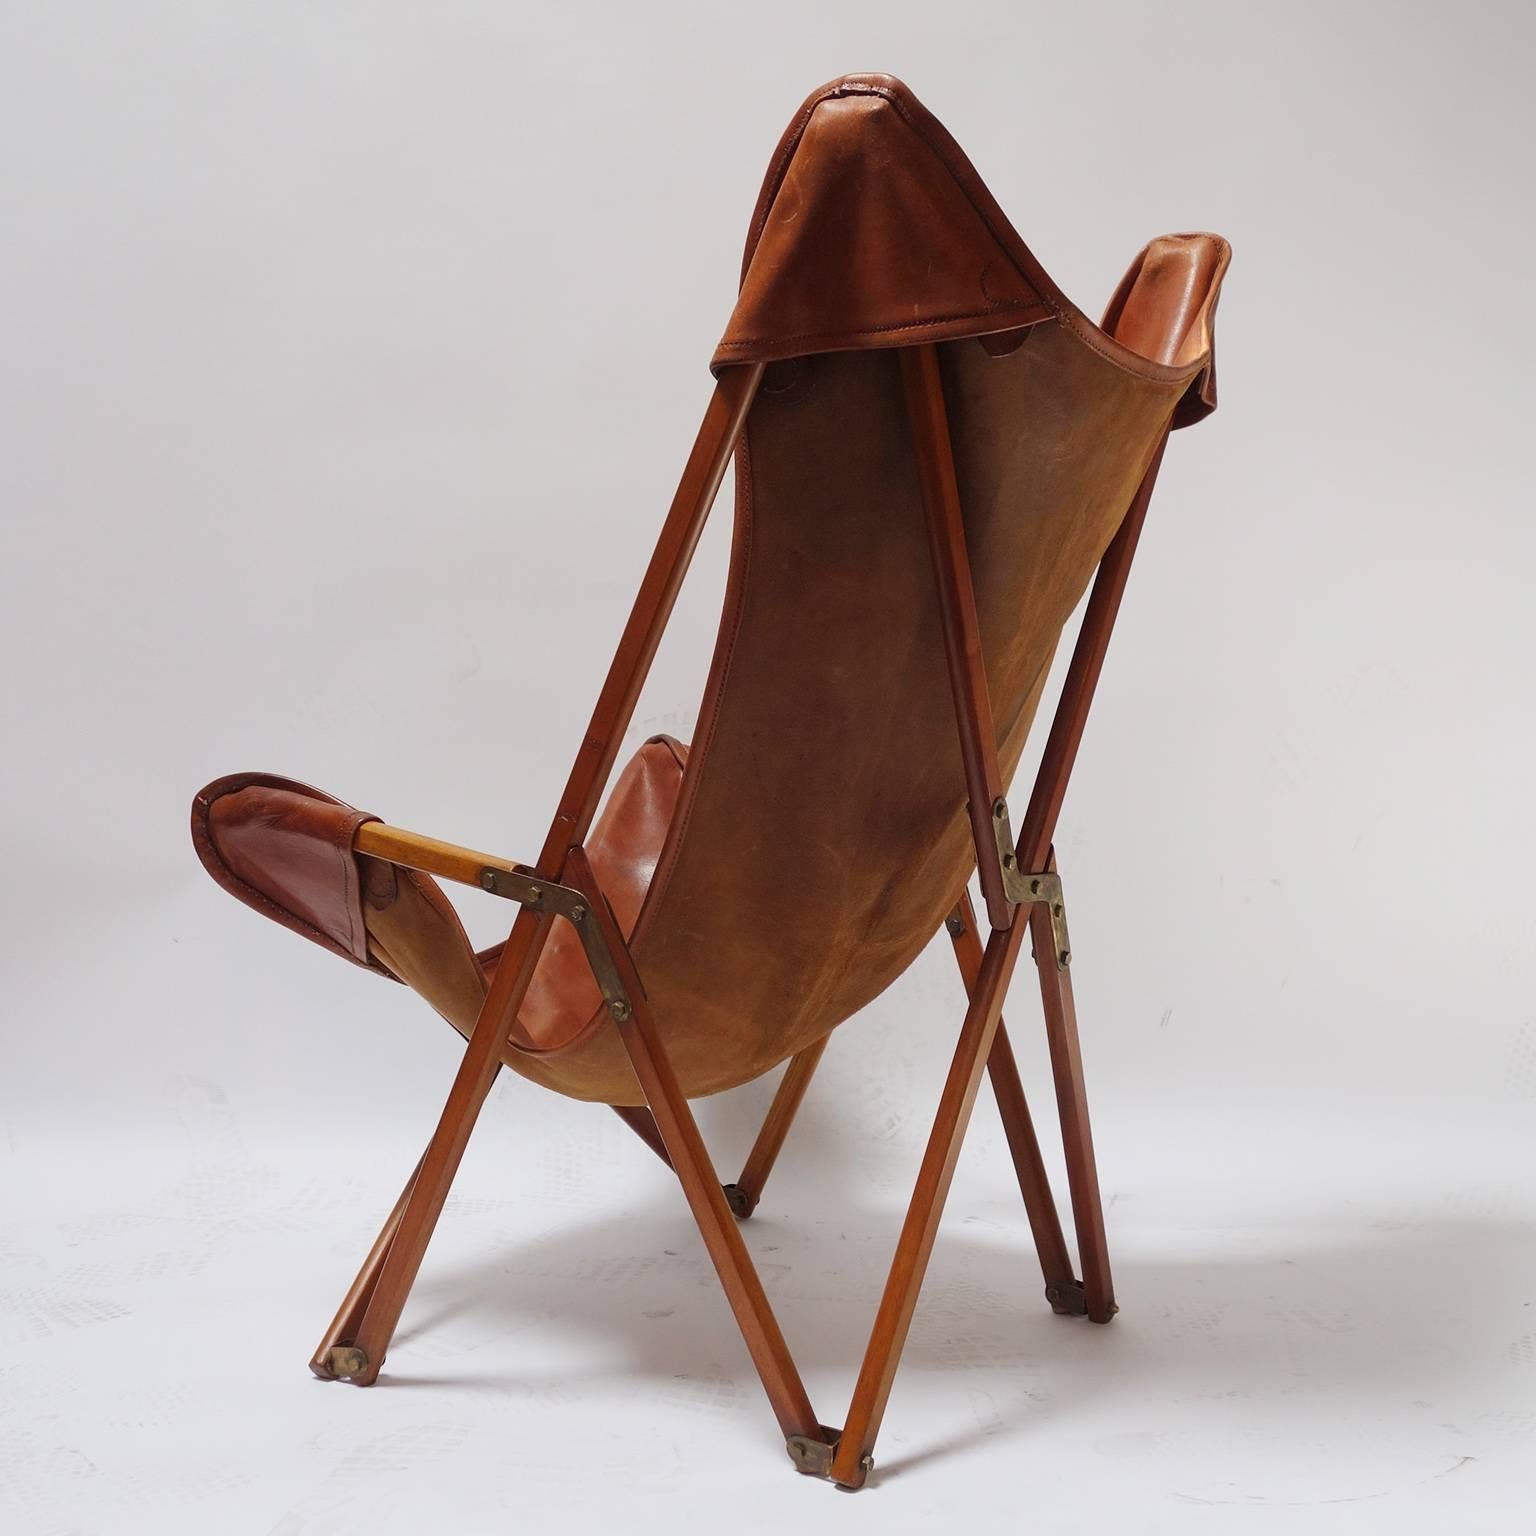 Foldable leather folding chair in the spirit of Joseph Beverly Fenby.

Inspired by the Tripolina chair, made from prior to WWII by the firm of Viganò in Tripoli, Libya, for the expatriate Italian market as a camping chair of great stability in